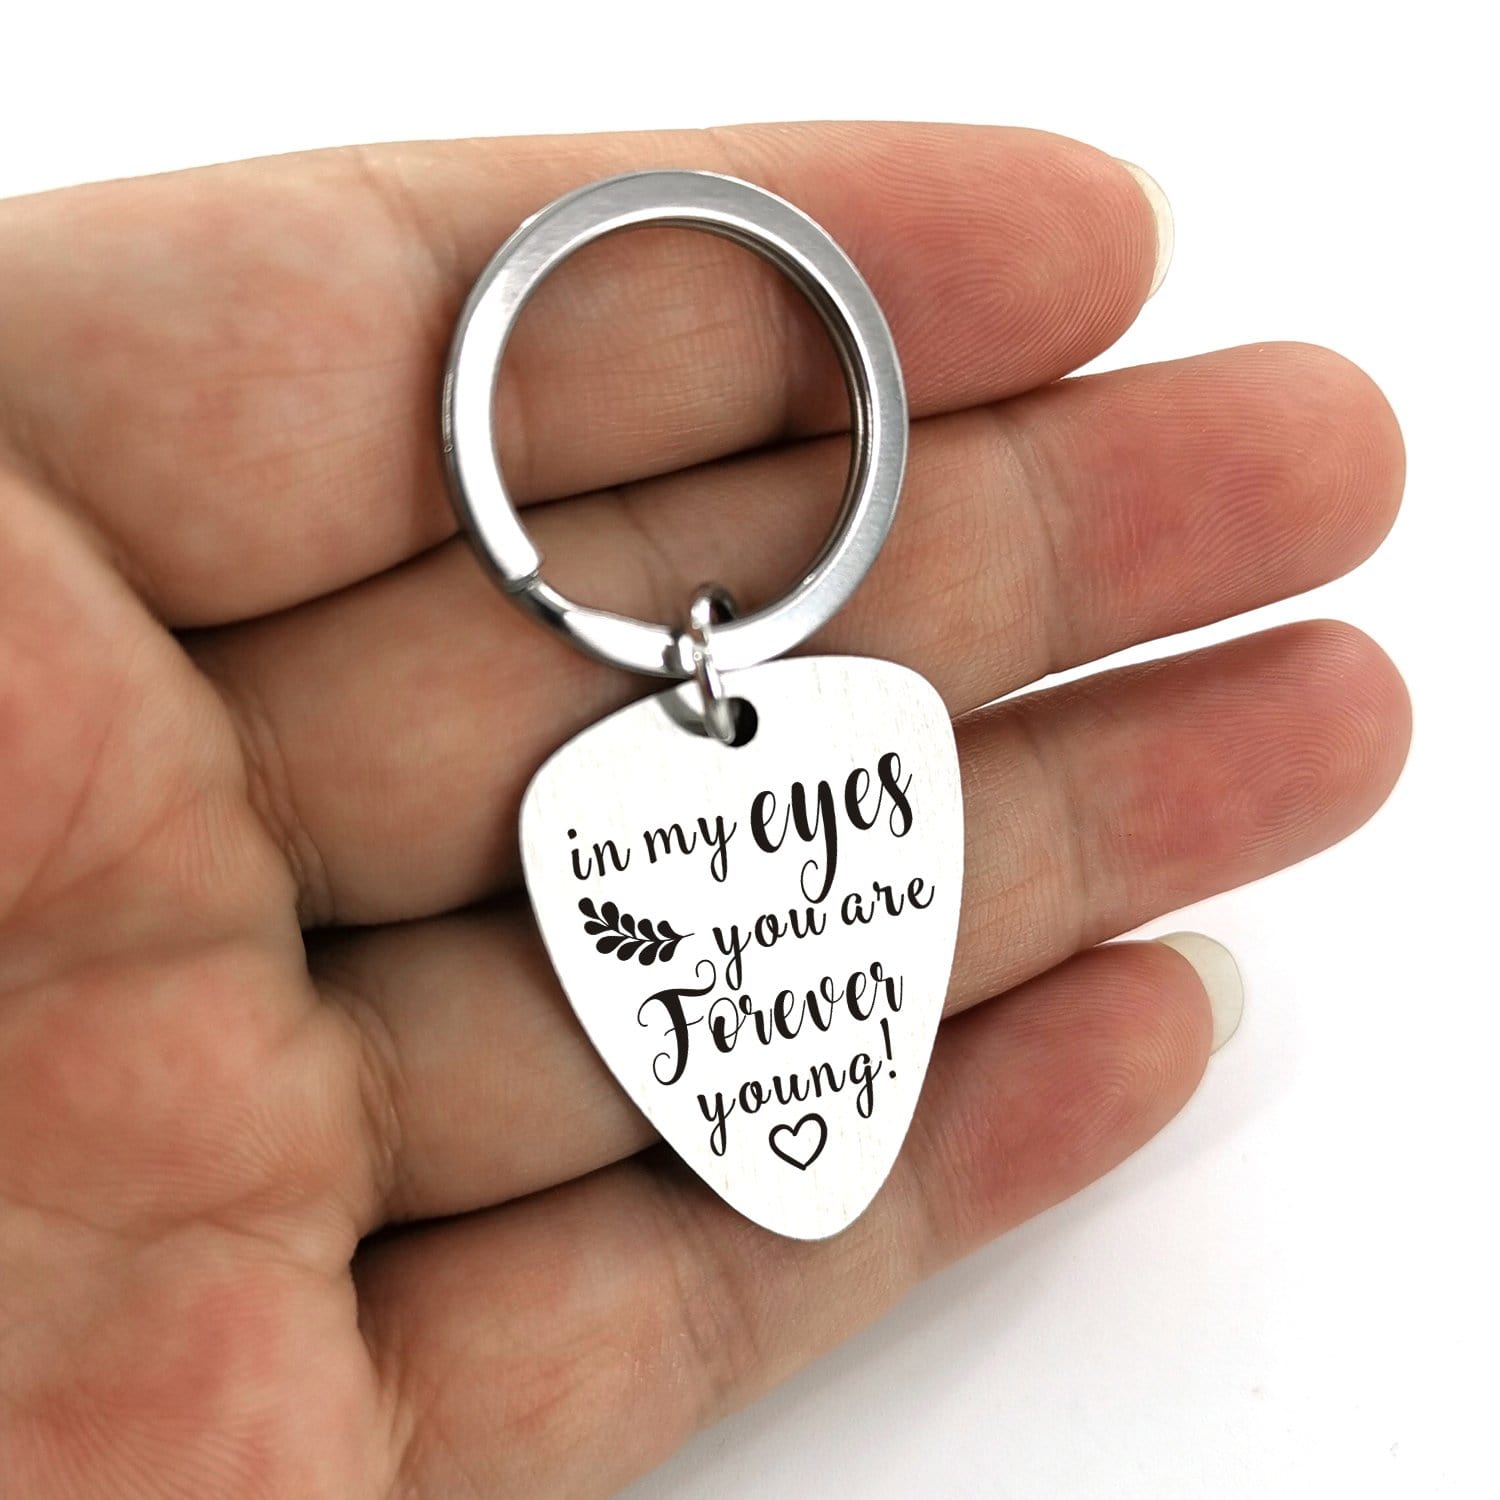 Guitar Pick Keychains In My Eyes You Are Forever Young - Customized Guitar Pick Keychain GiveMe-Gifts